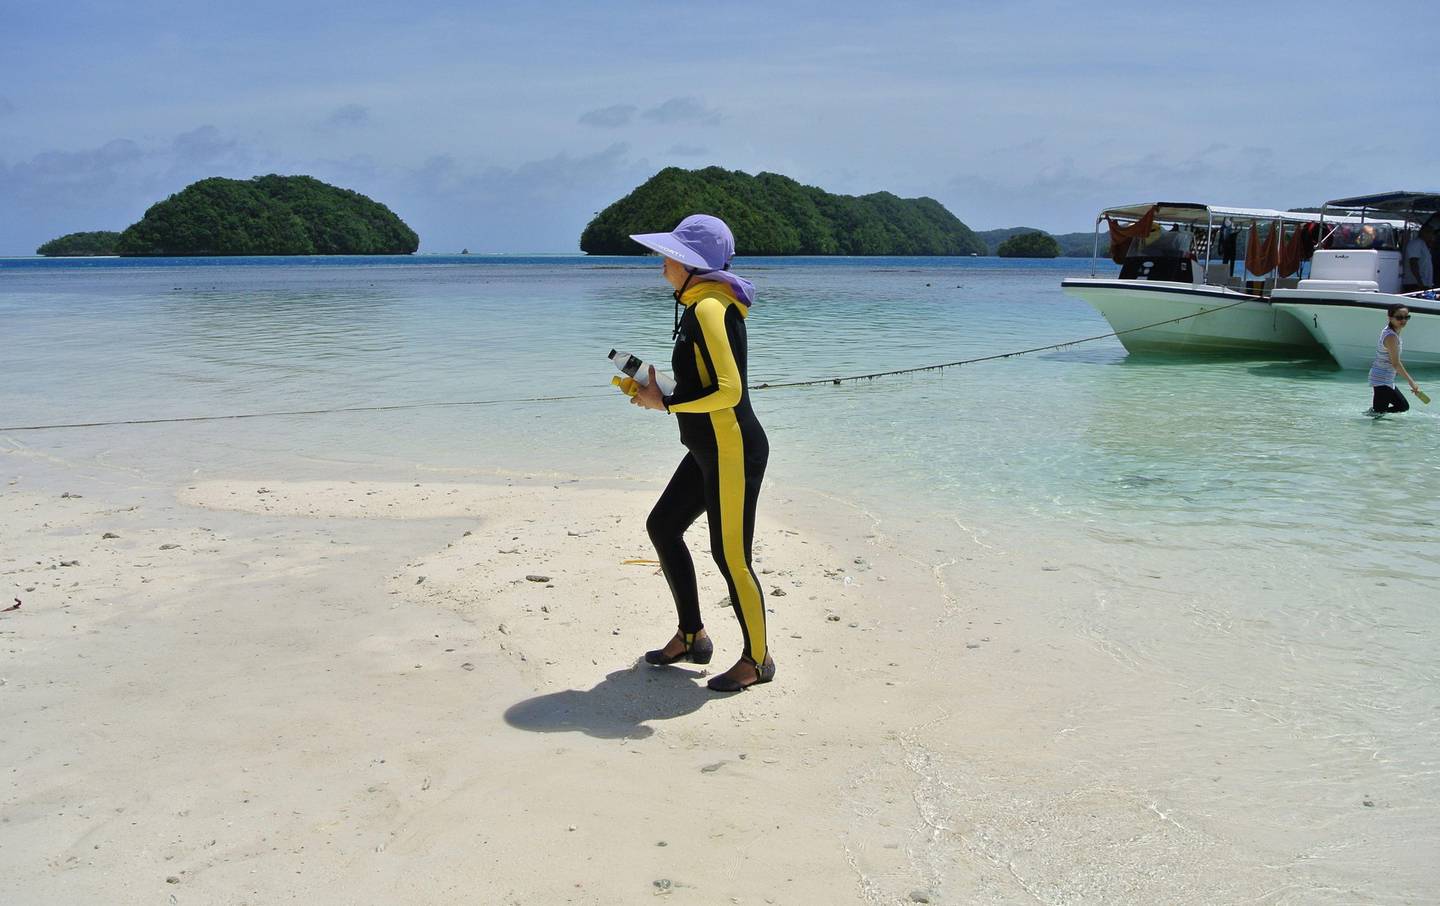 (FILES) This file picture taken on March 6, 2015 shows a Chinese tourist walking on a beach on the Rock Islands in Palau.
Visitors to the tiny Pacific nation of Palau are being made to sign a promise to respect the environment, in an innovative move that authorities hope will curb ecological damage caused by booming numbers of tourists. / AFP PHOTO / SEBASTIEN BLANC